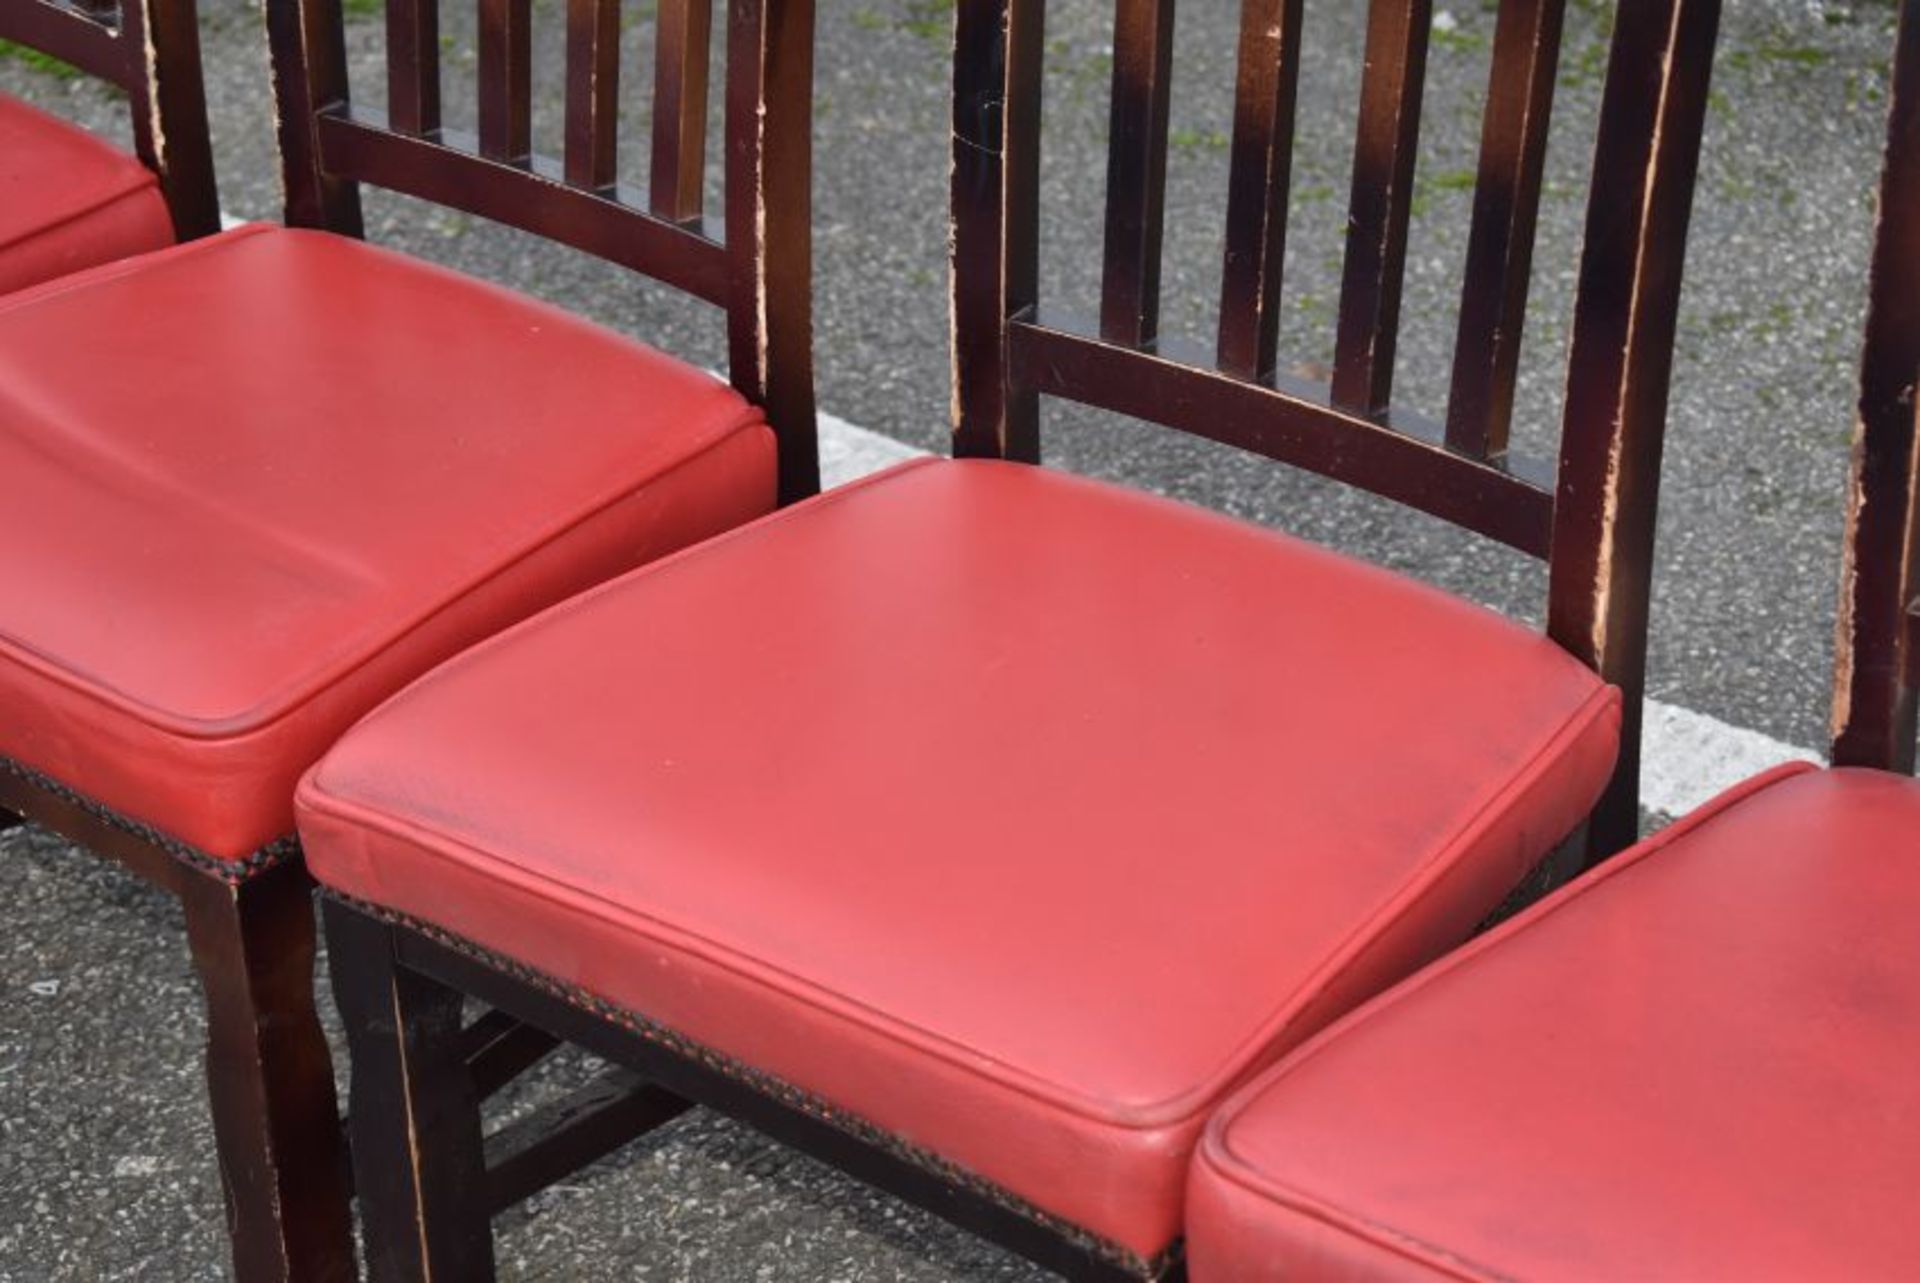 16 x Restaurant Dining Chairs With Dark Stained Wood Finish and Red Leather Seat Pads - Recently - Image 5 of 6